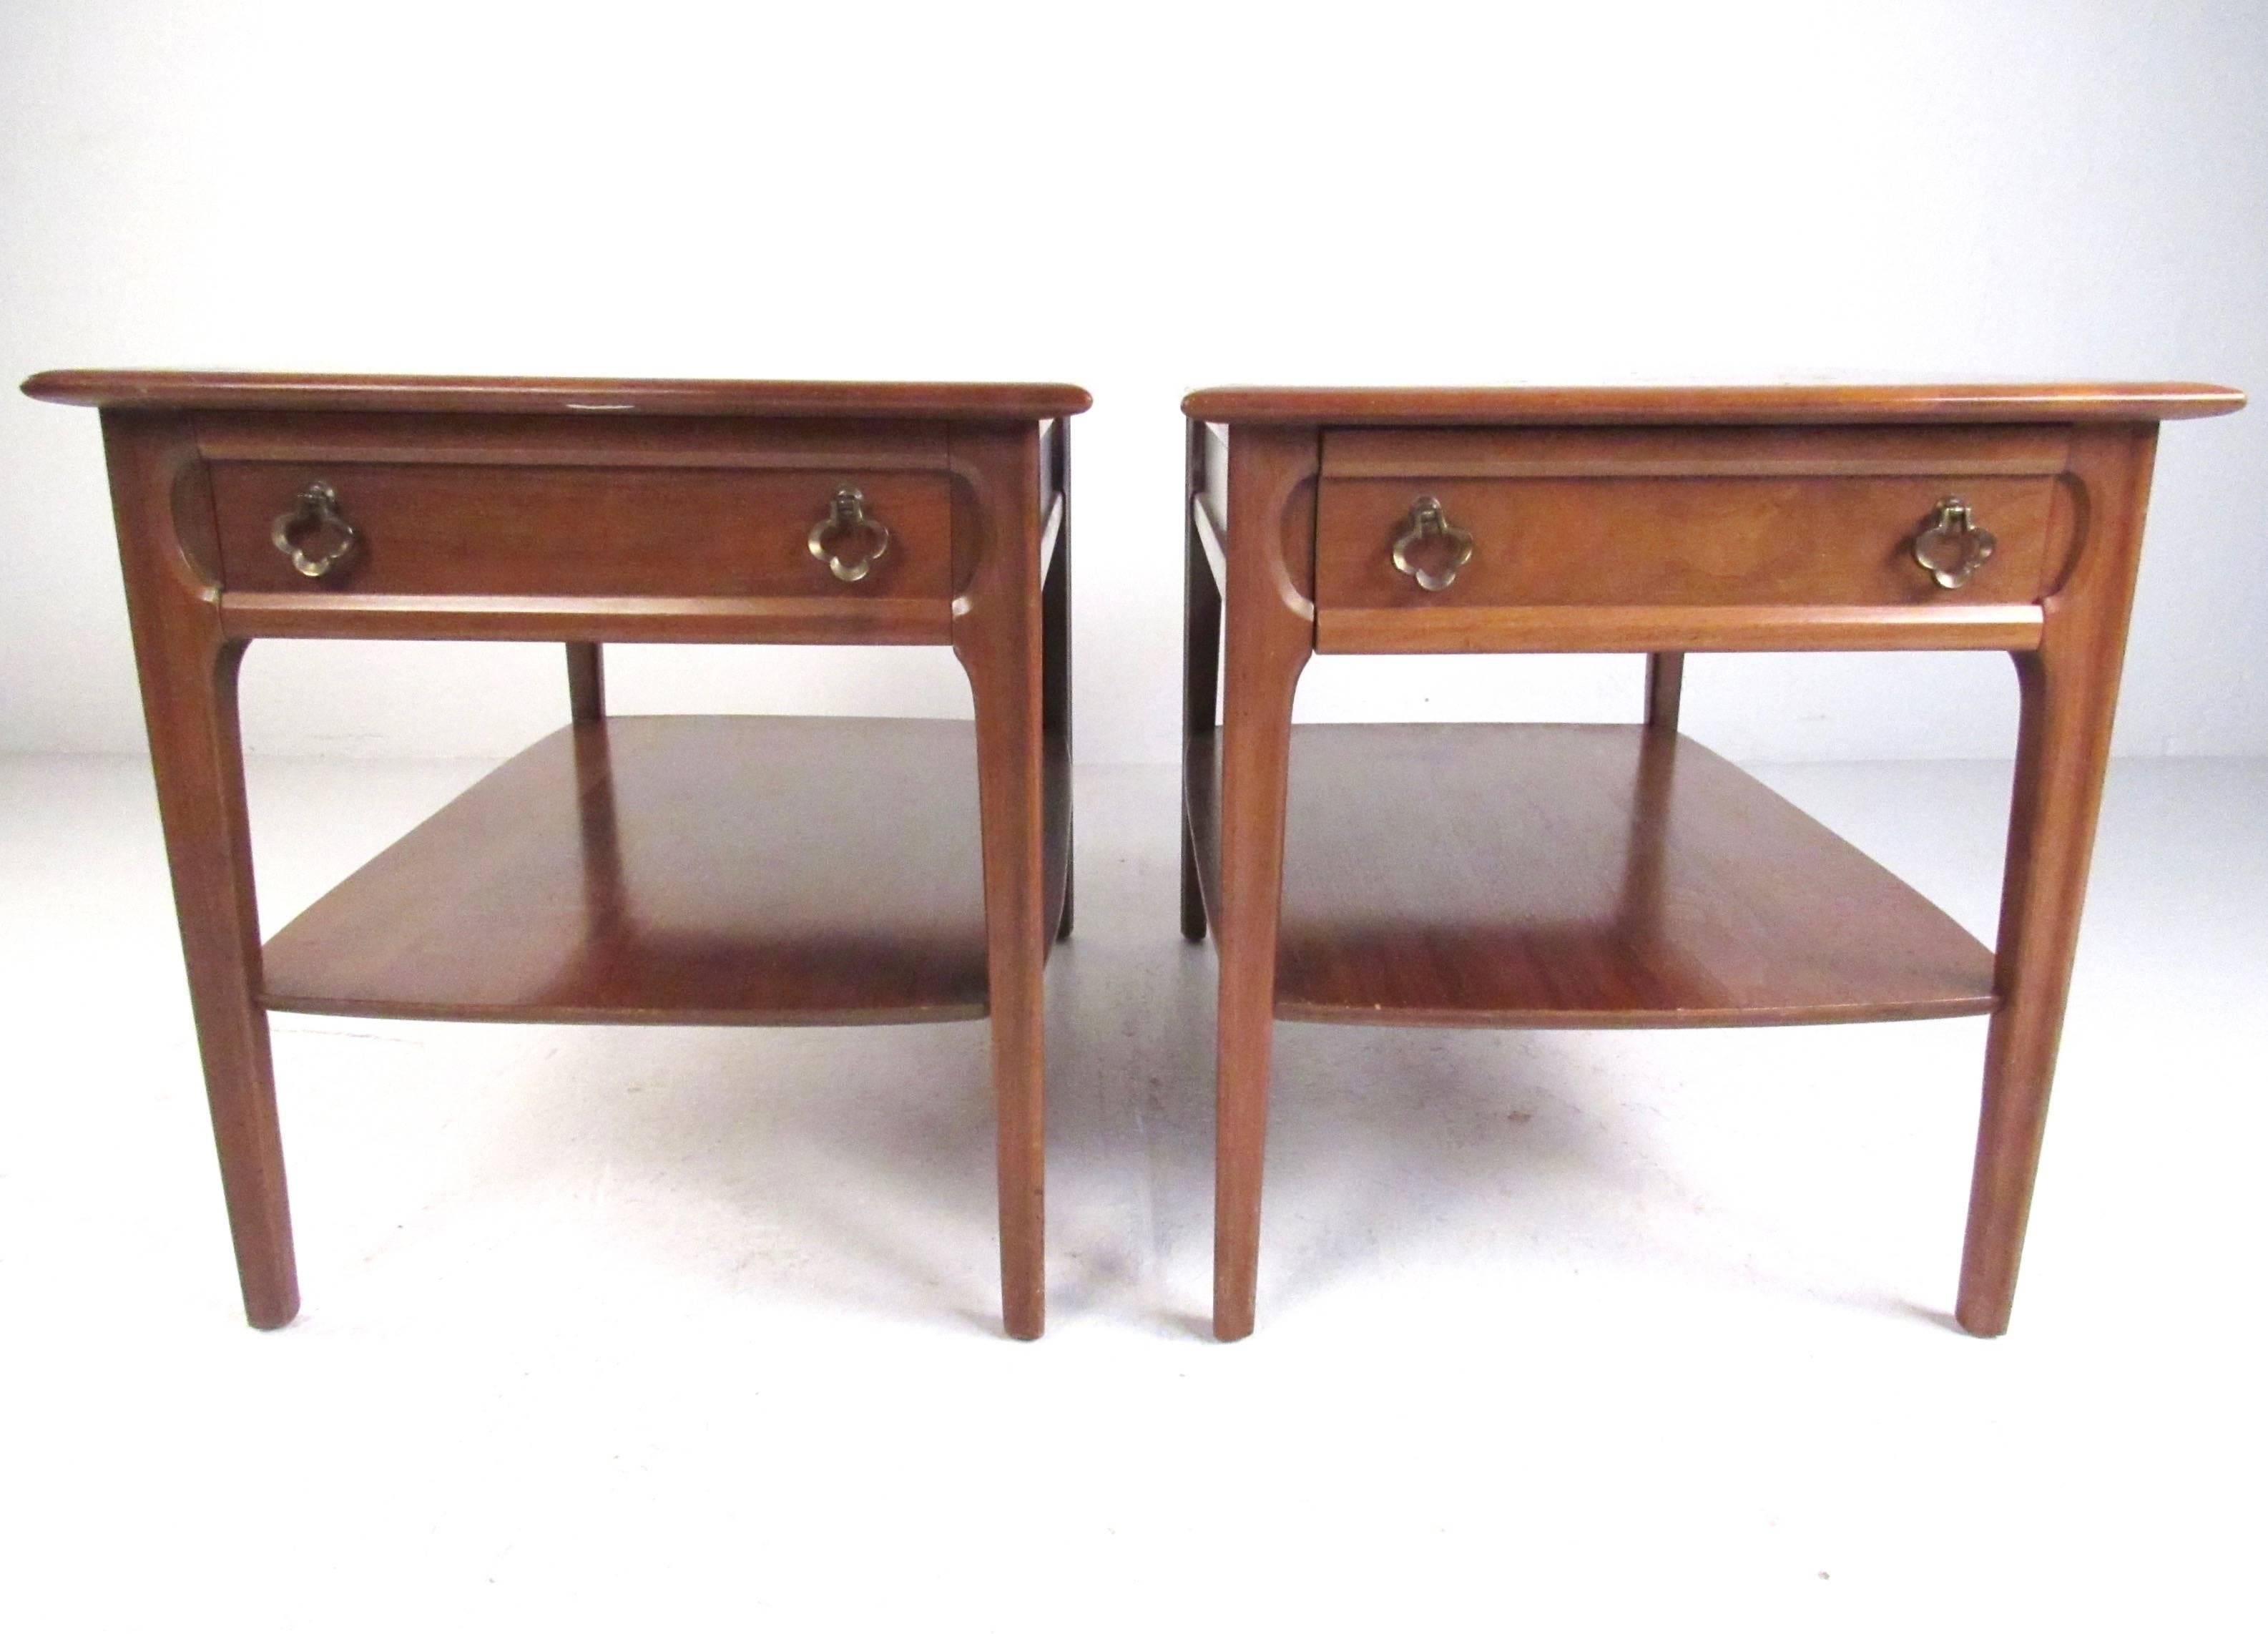 This stylish pair of walnut side tables feature uniquely sculpted accents, dual-tier construction and ornate brass pulls. Perfect matching set to add Mid-Century style and spacious storage to any interior setting from sofa side table to bedside